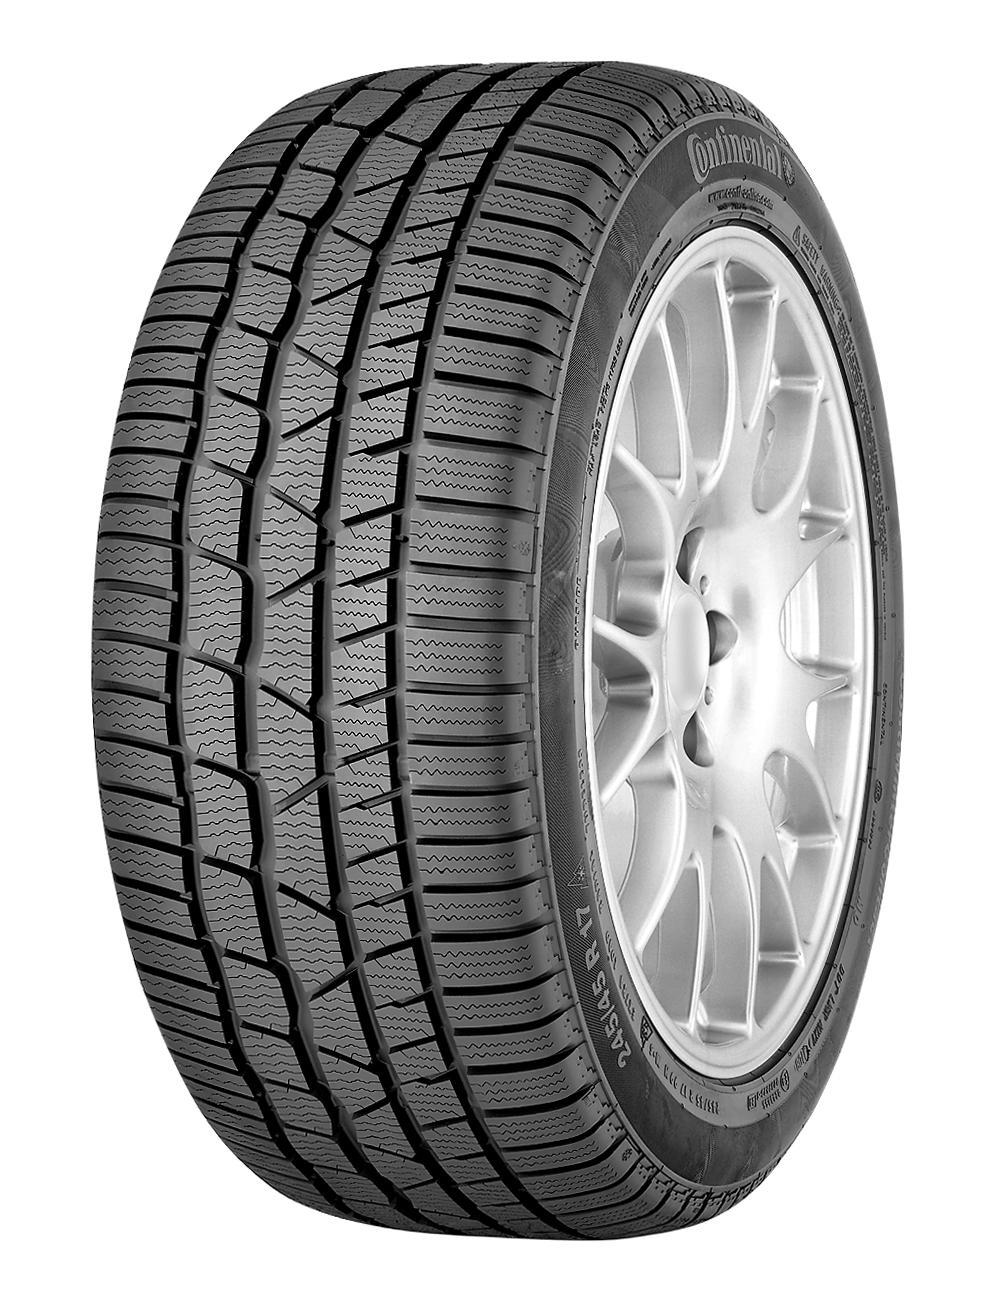 Anvelope iarna CONTINENTAL WINTER CONTACT TS830 P FR SUV 255/60 R18 108H